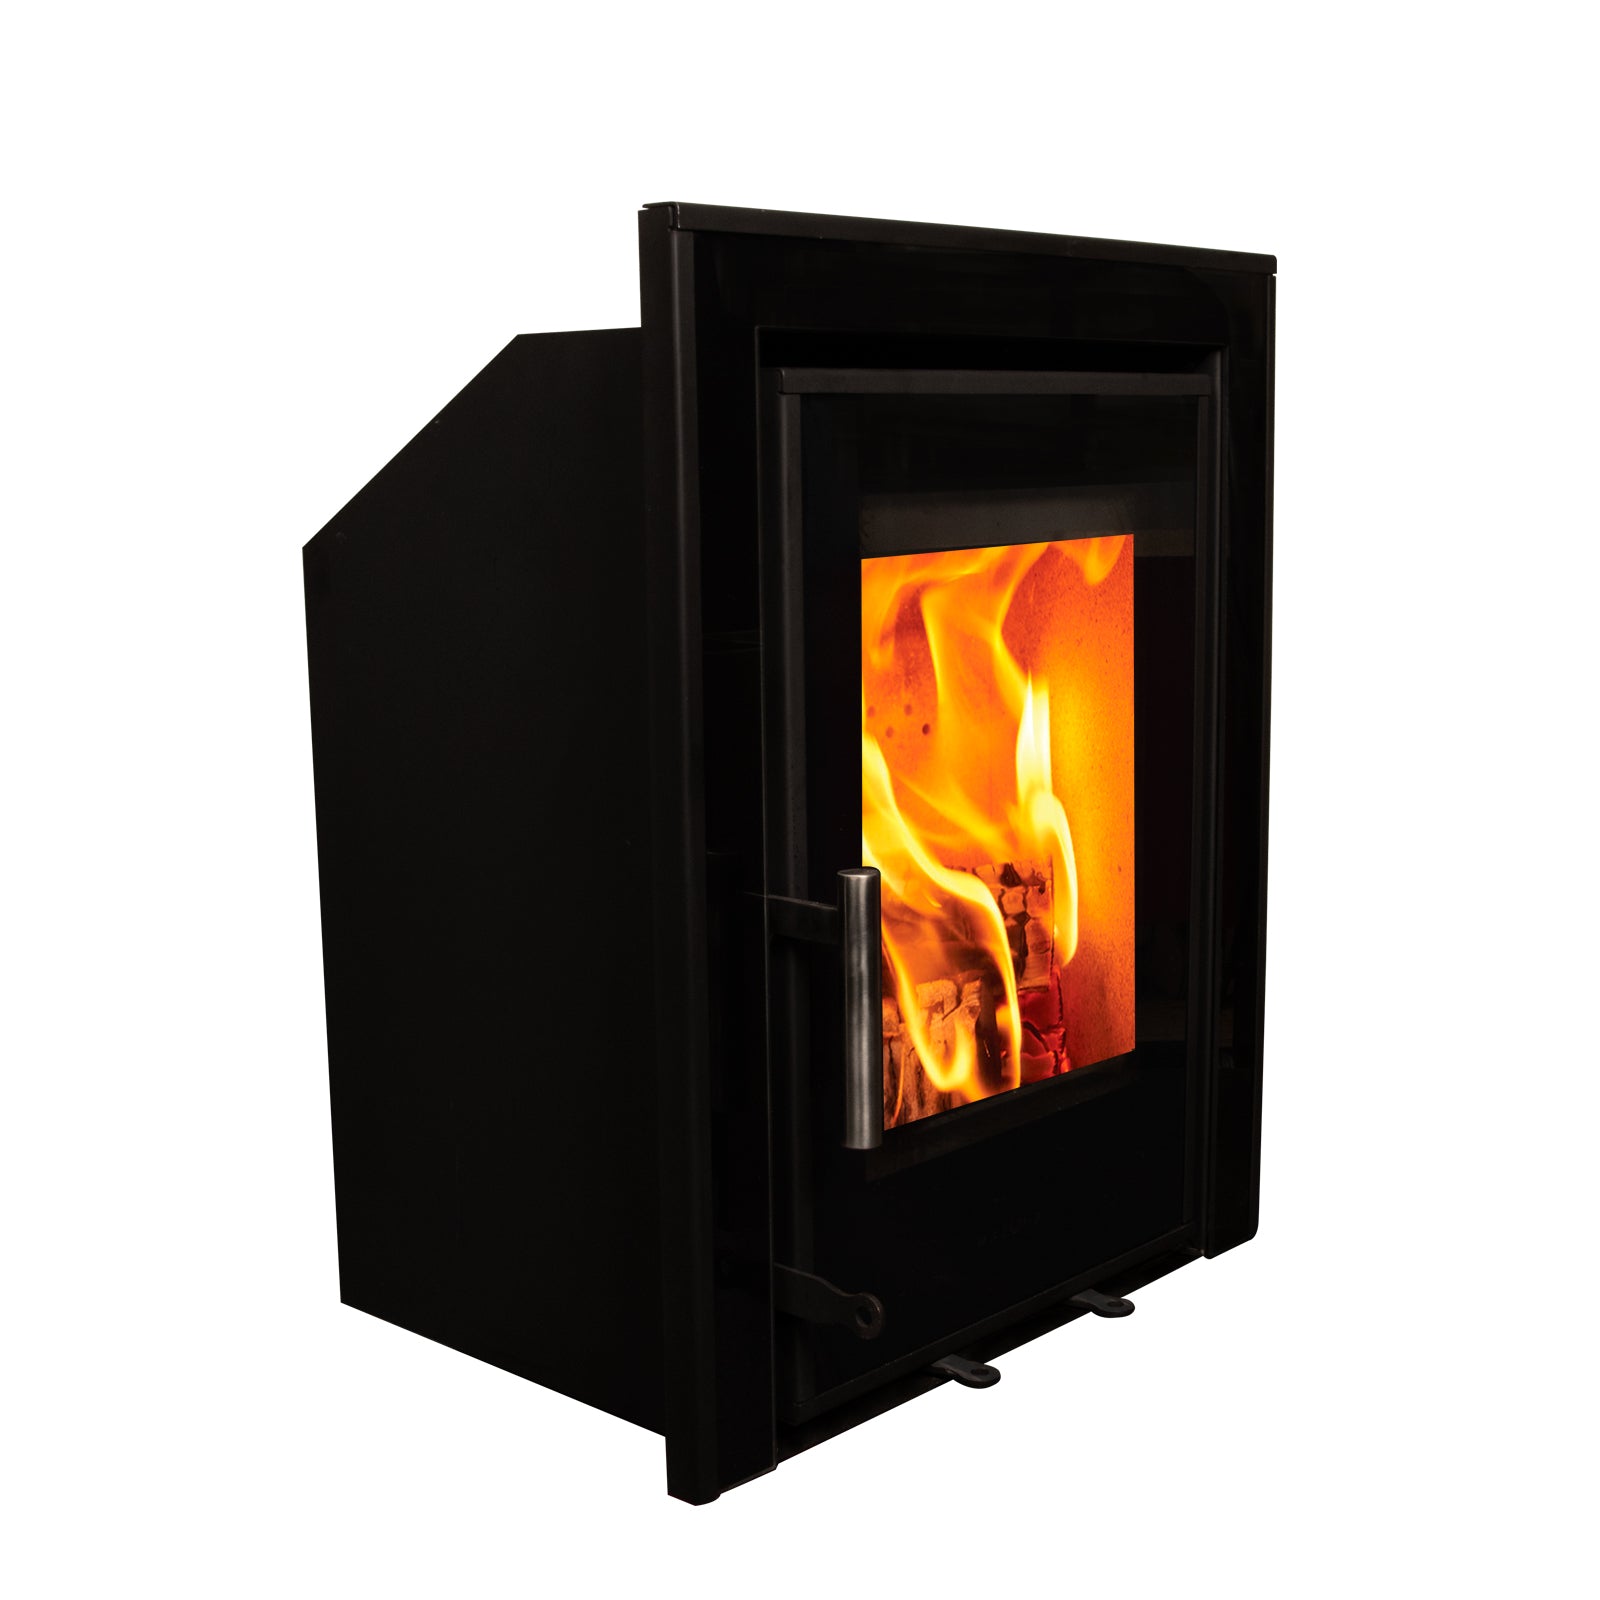 Use an Inset Multi-Fuel Stove to Improve Efficiency.